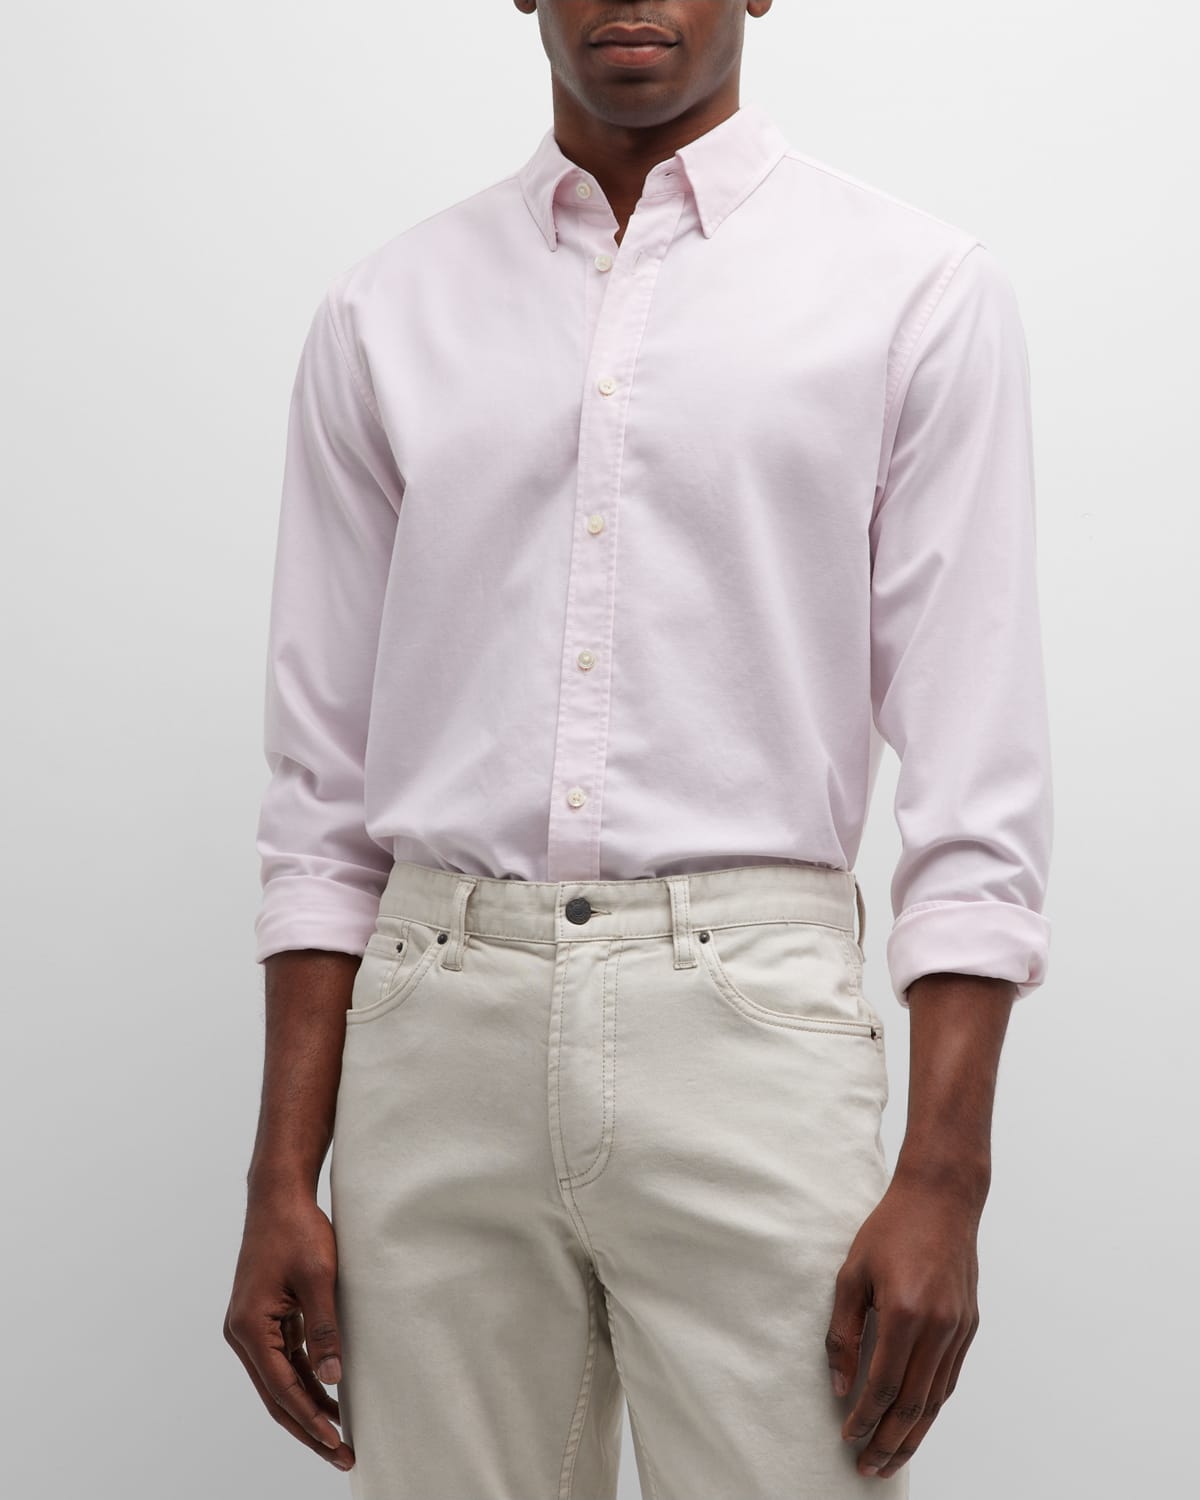 THEORY MEN'S IRVING OXFORD COTTON BUTTON-FRONT SHIRT